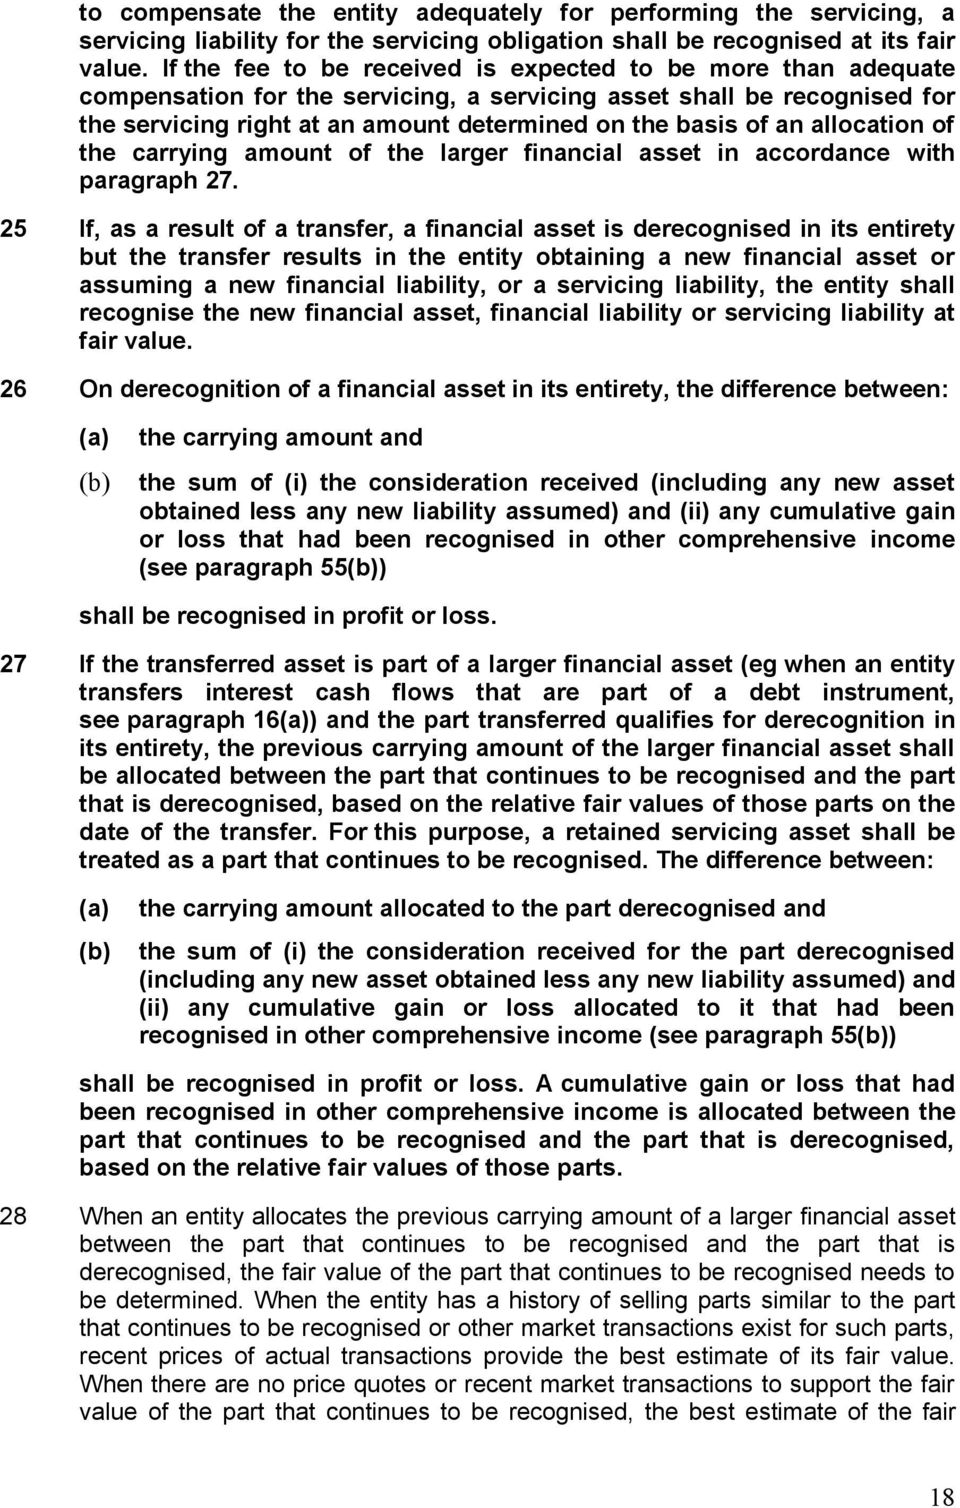 allocation of the carrying amount of the larger financial asset in accordance with paragraph 27.